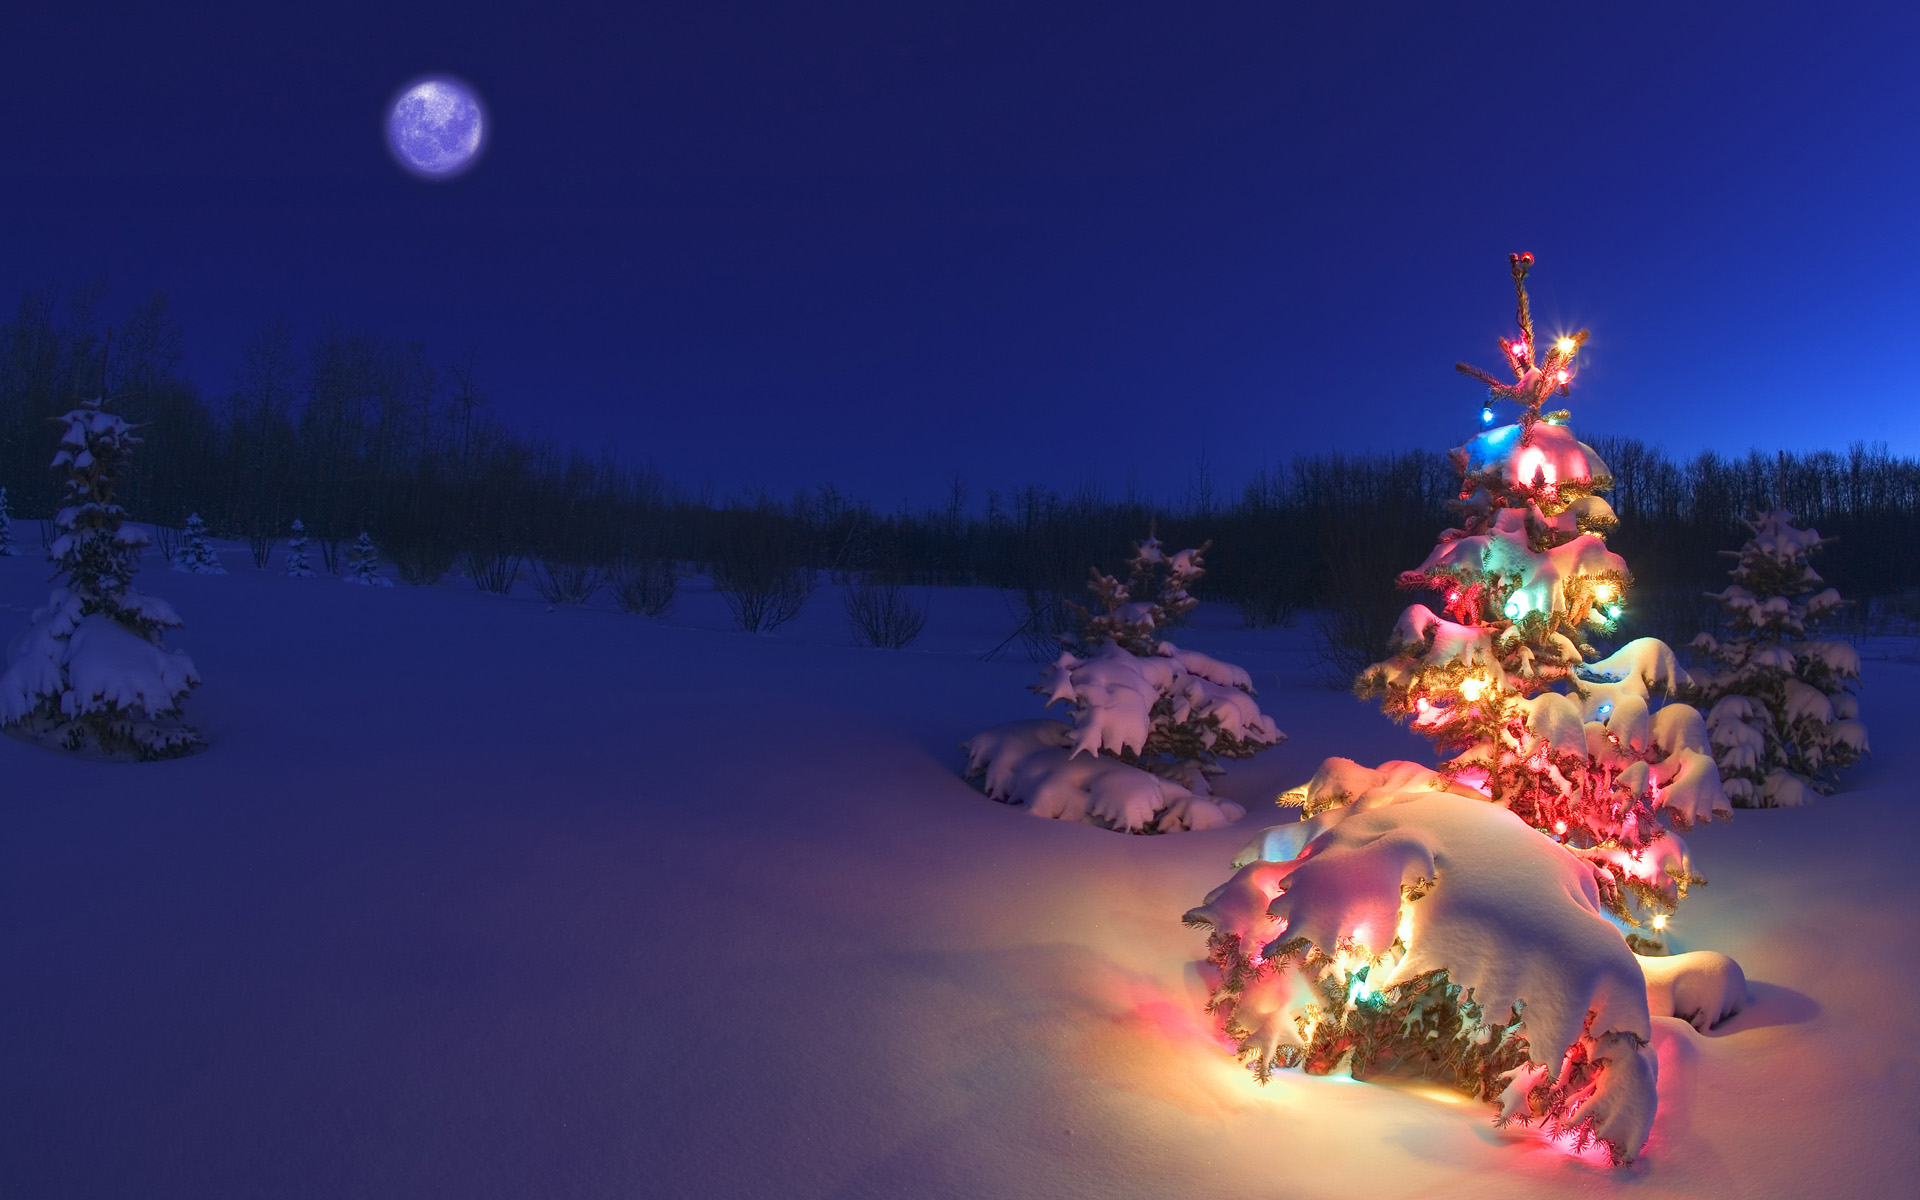 Wallpaper Of A Christmas Tree In Snowy Night World